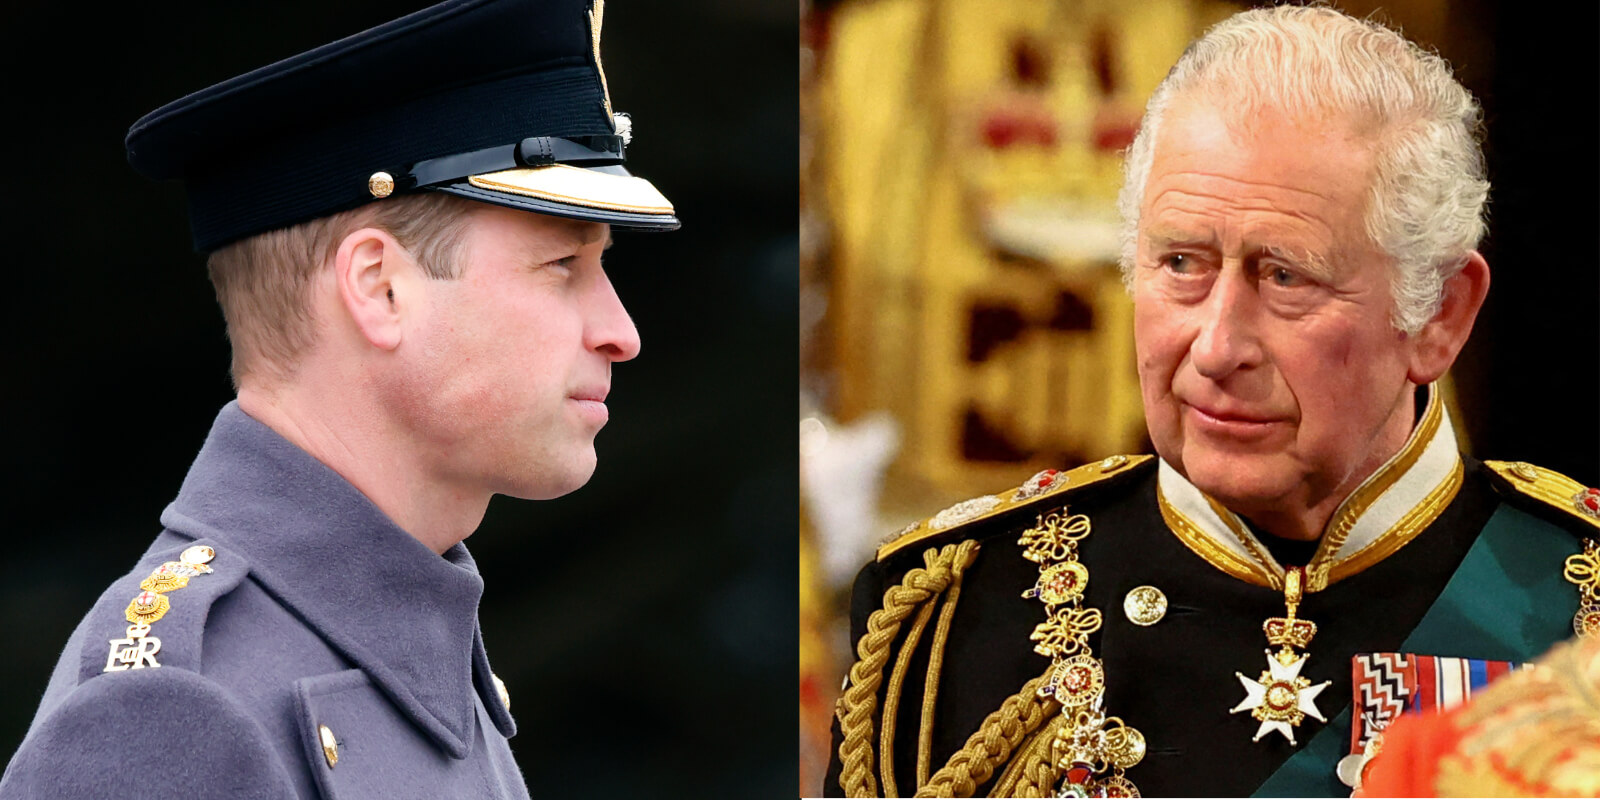 Prince William and his father King Charles in side by side photographs.